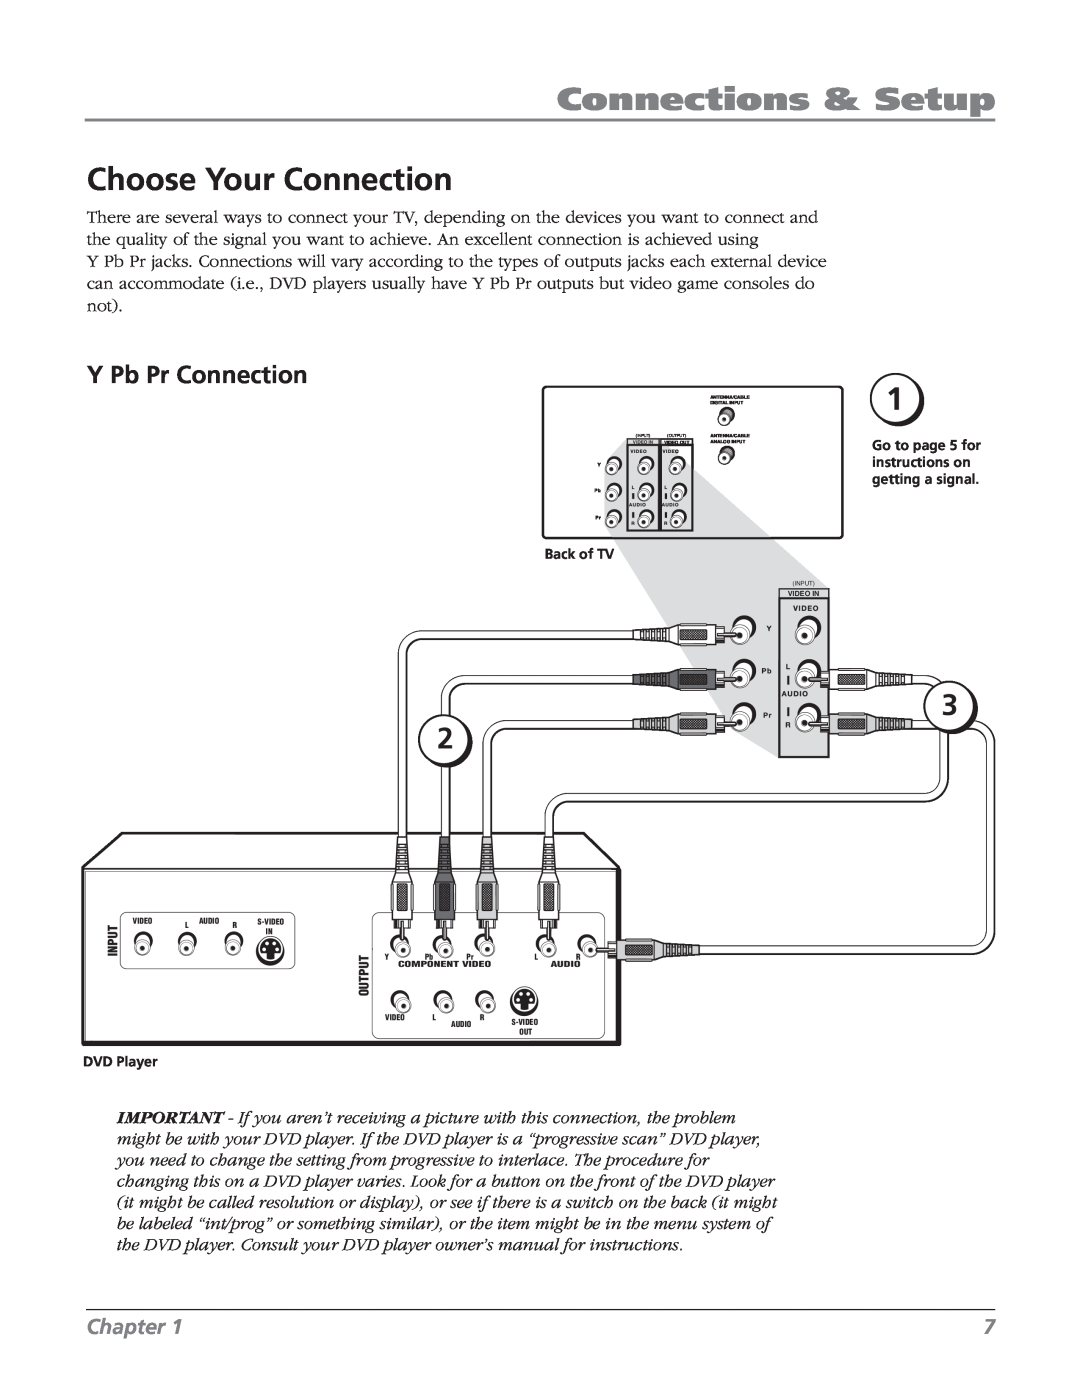 RCA 32v434t, 32V524T manual Choose Your Connection, Y Pb Pr Connection, Connections & Setup, Chapter 